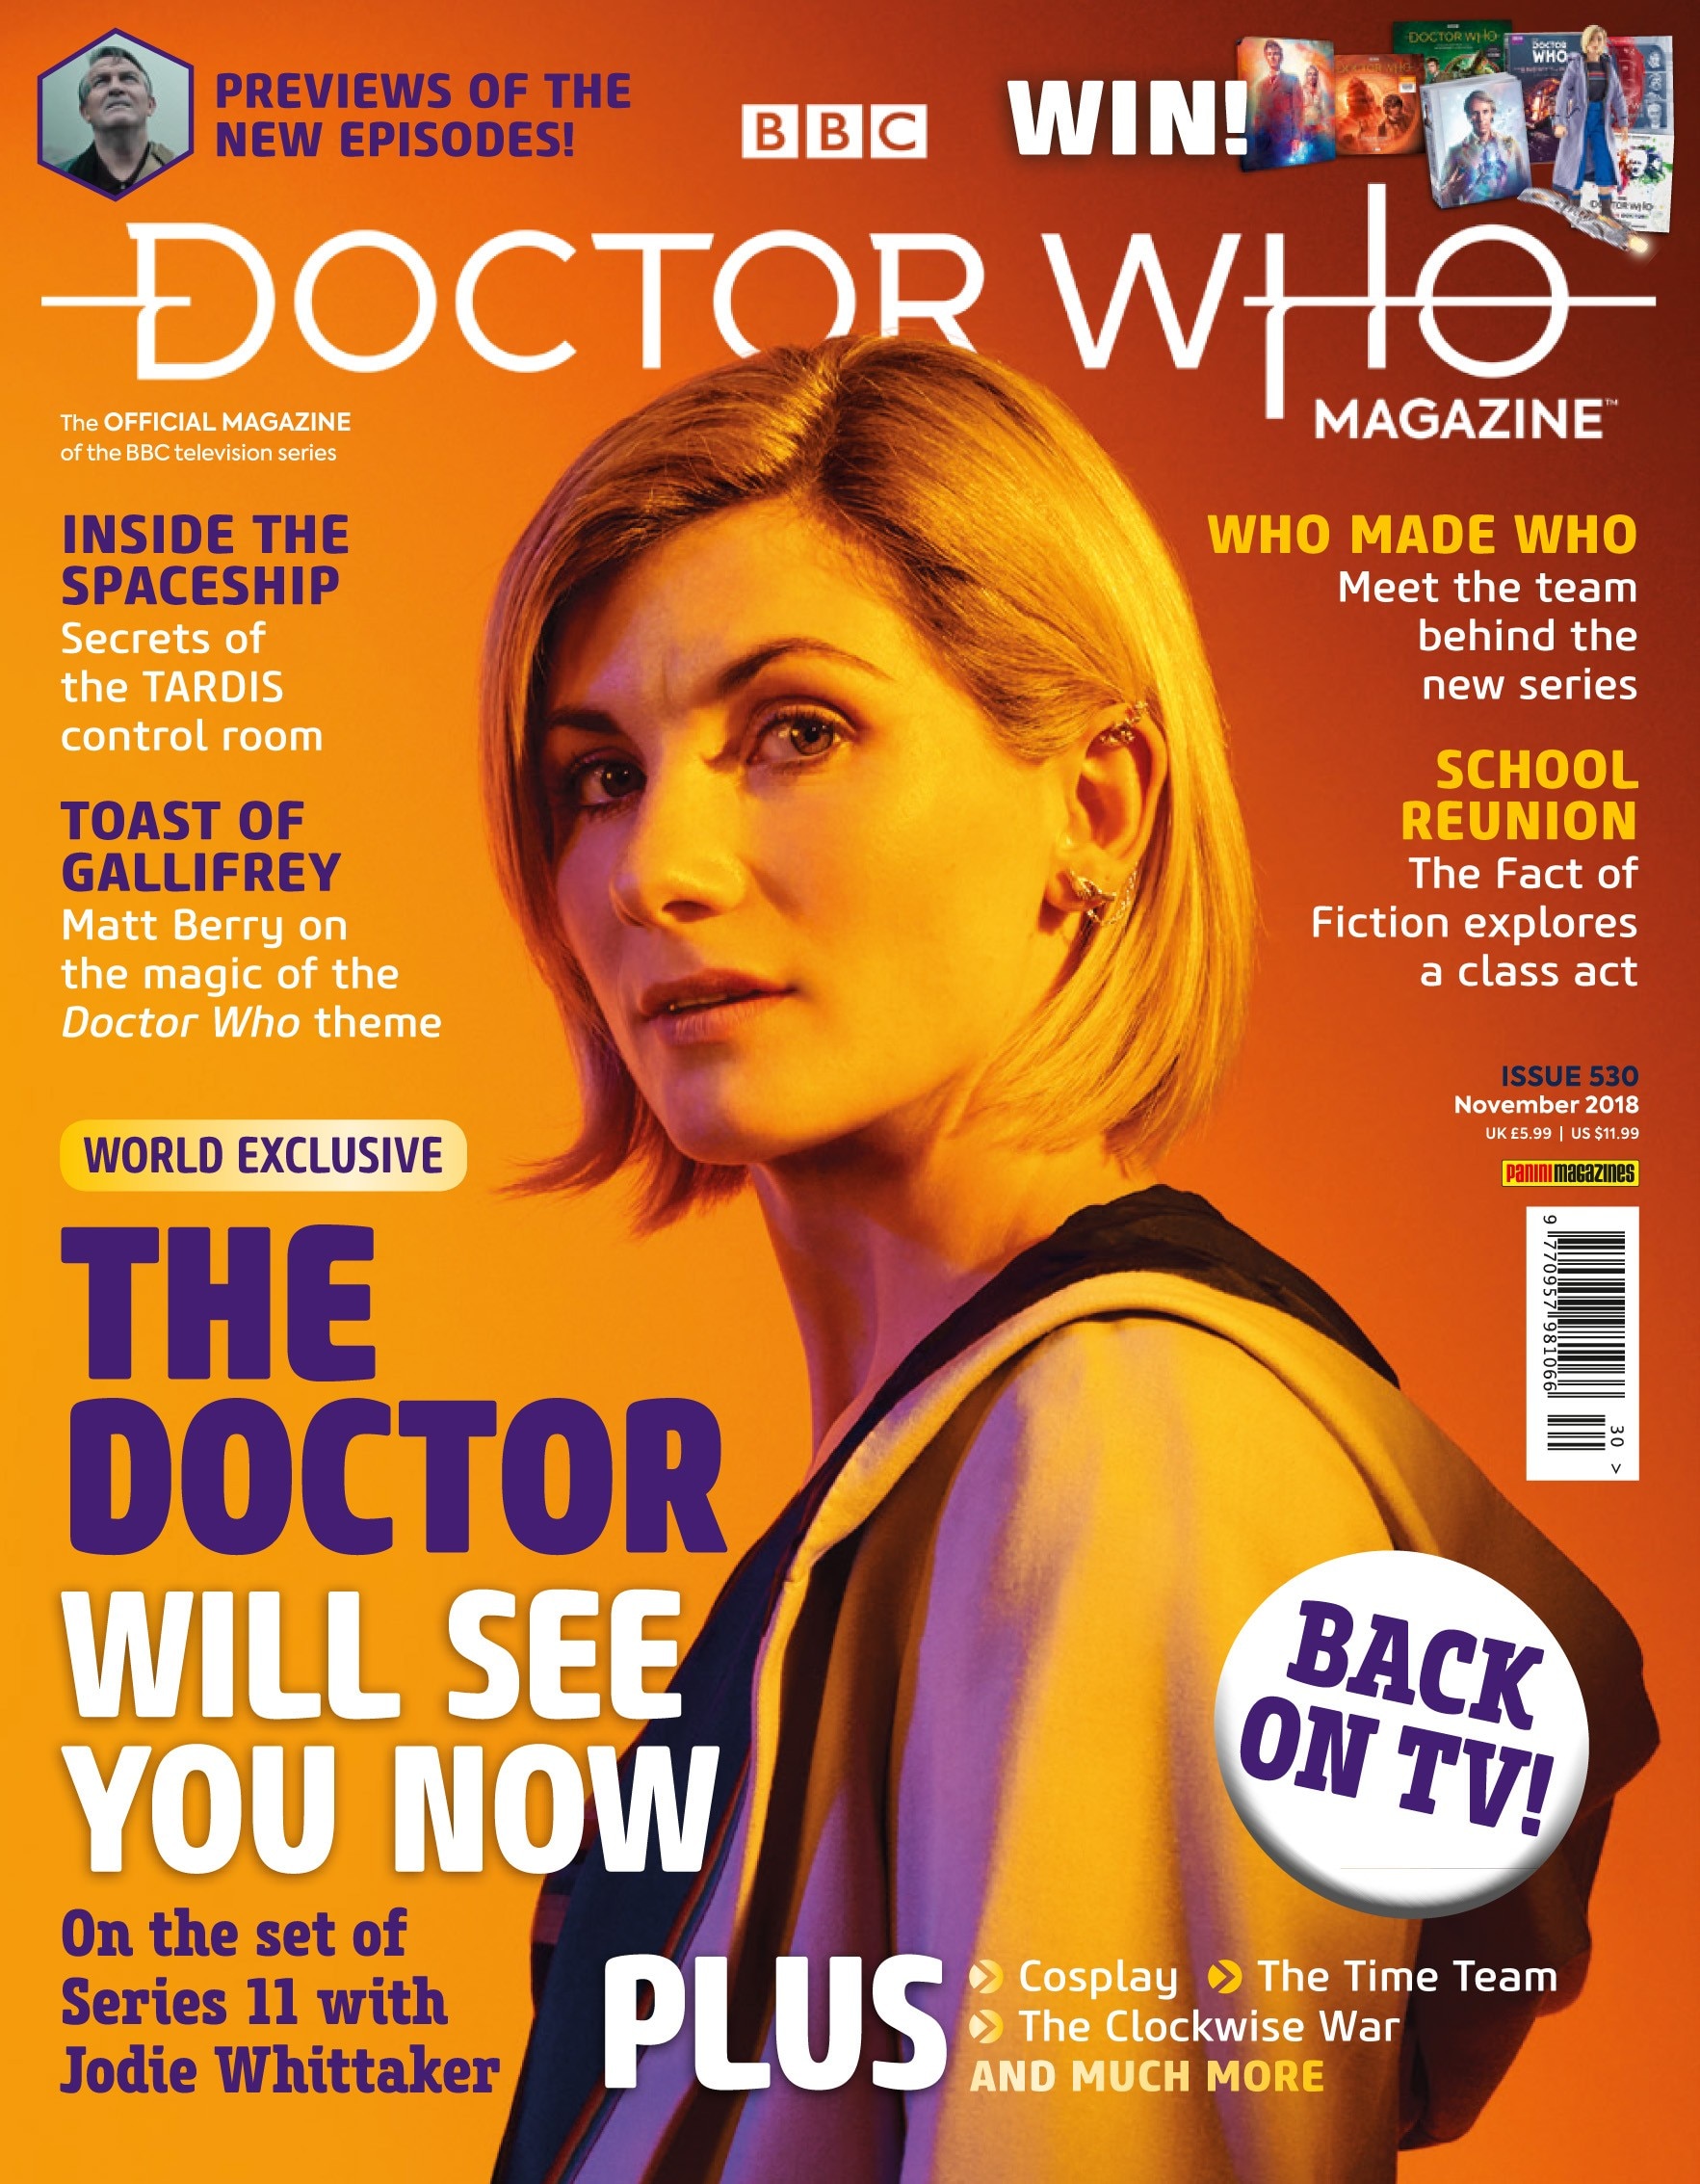 Jodie Whittaker’s performance in Doctor Who will be “high energy ...